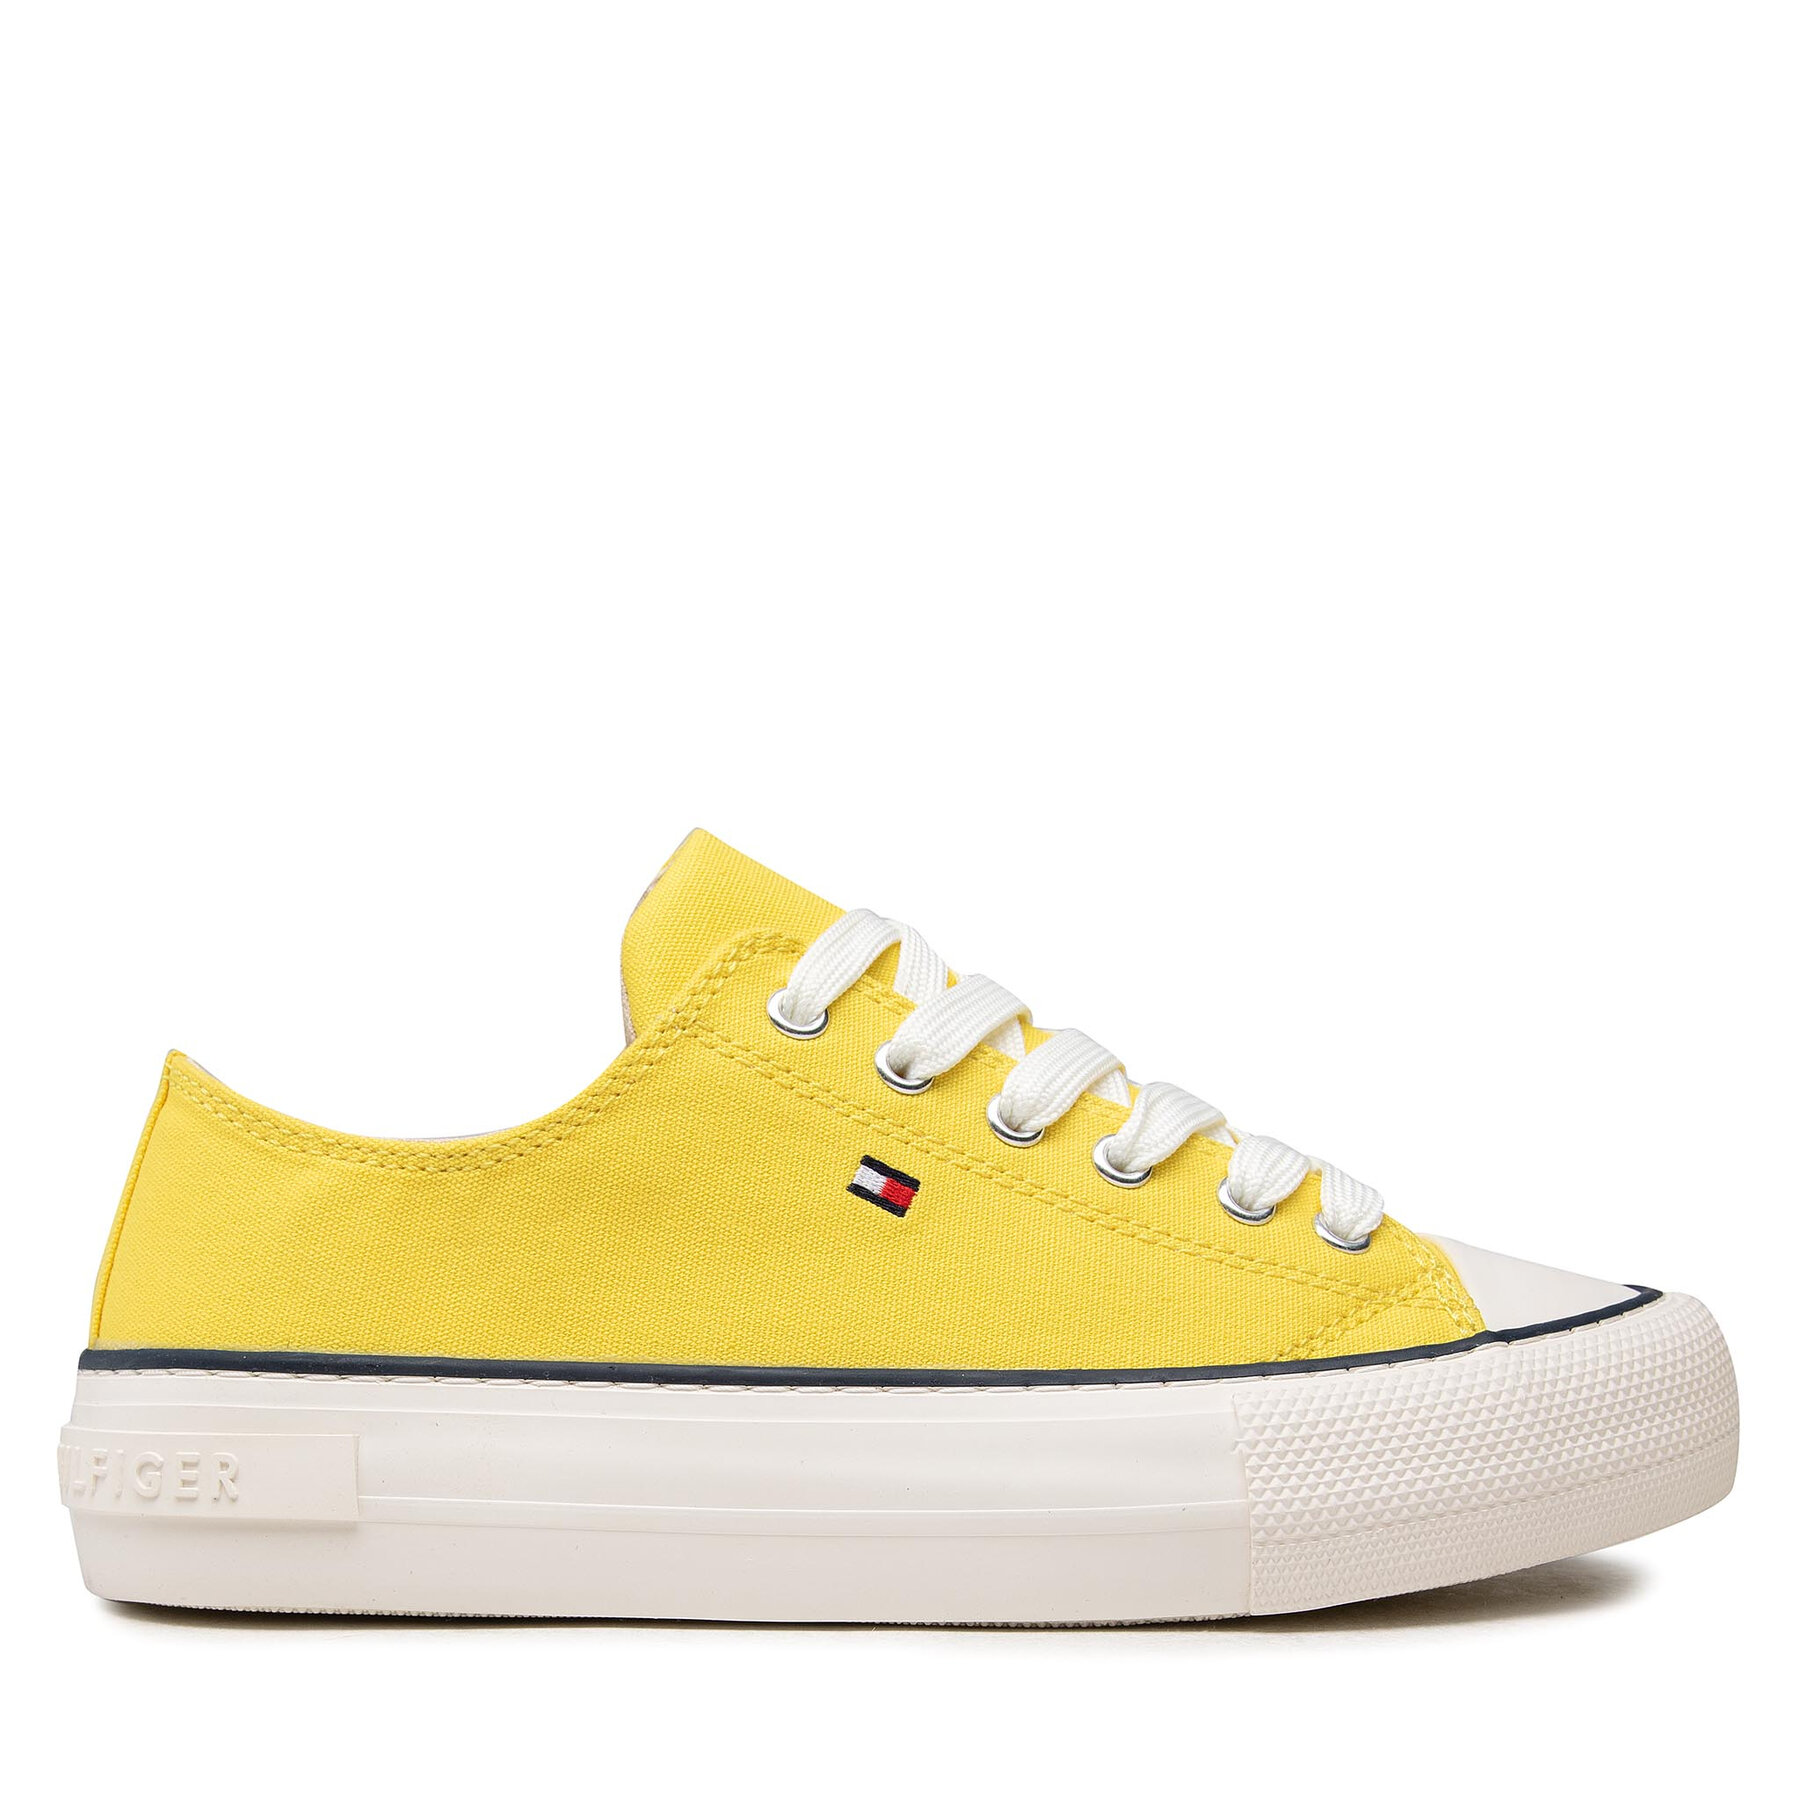 Sportschuhe Tommy Hilfiger Low Cut Lace-Up Sneaker T3A4-32118-0890 S Yellow 200 von Tommy Hilfiger